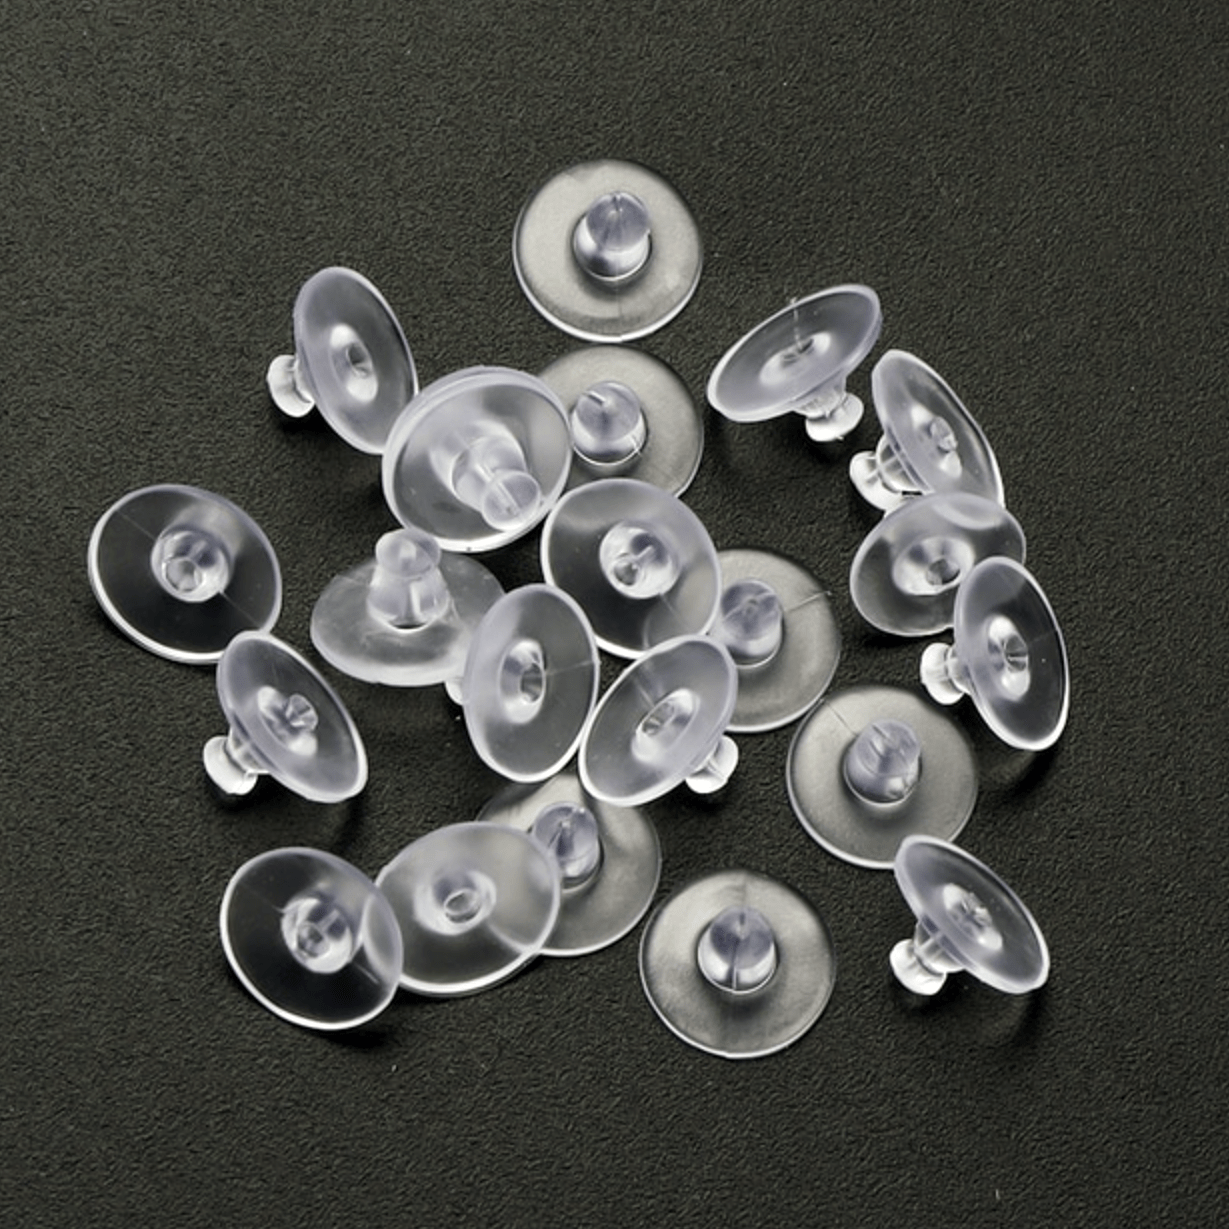 10 x Stud Earrings Backs, Clear Silicone Stoppers - inSync design